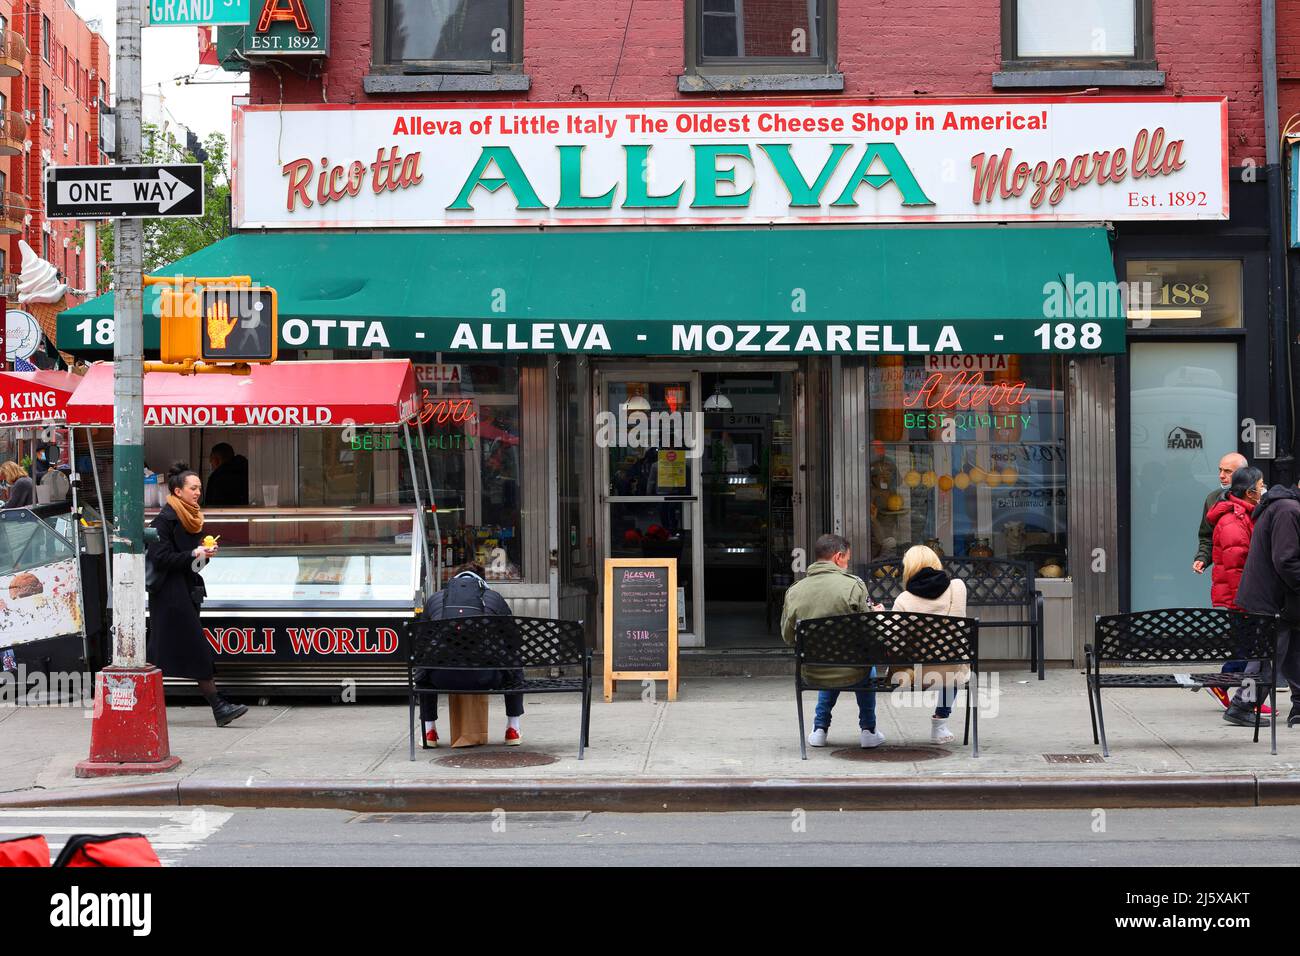 [historical storefront] Alleva Dairy, 188 Grand St, New York, NYC storefront photo of a cheese store in Manhattan's Little Italy neighborhood. Stock Photo